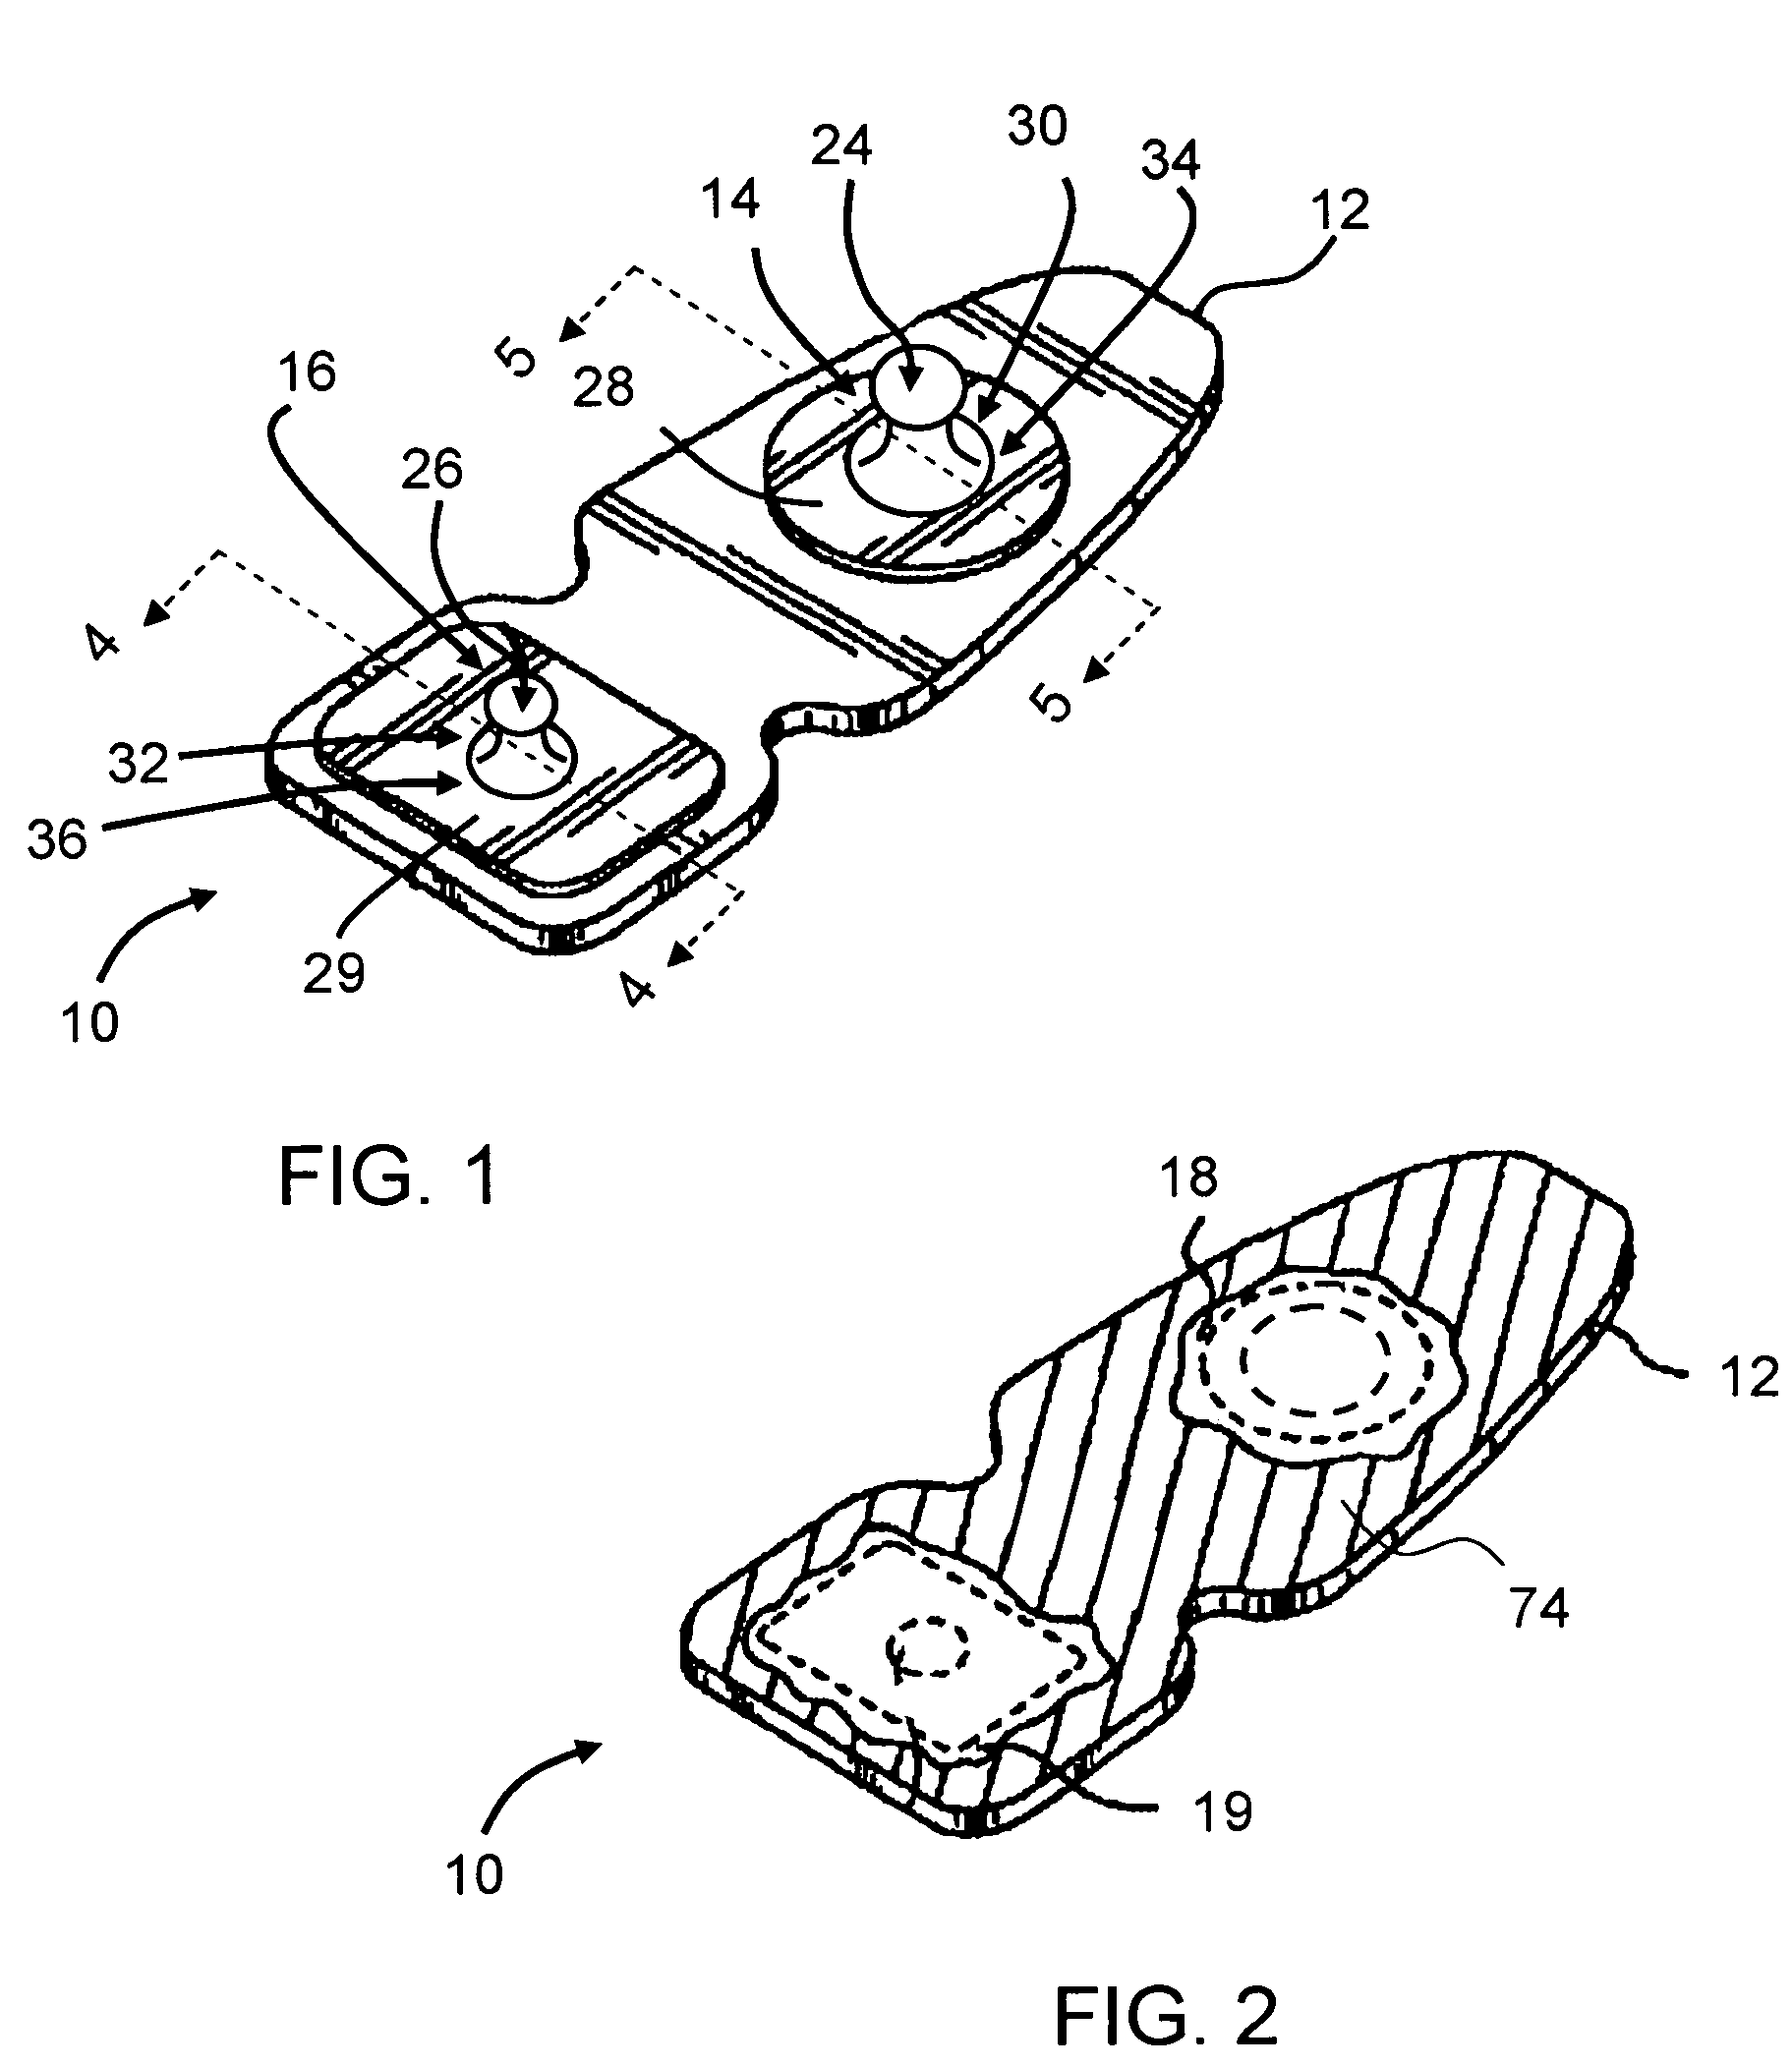 Methods and apparatus for conducting electrical current